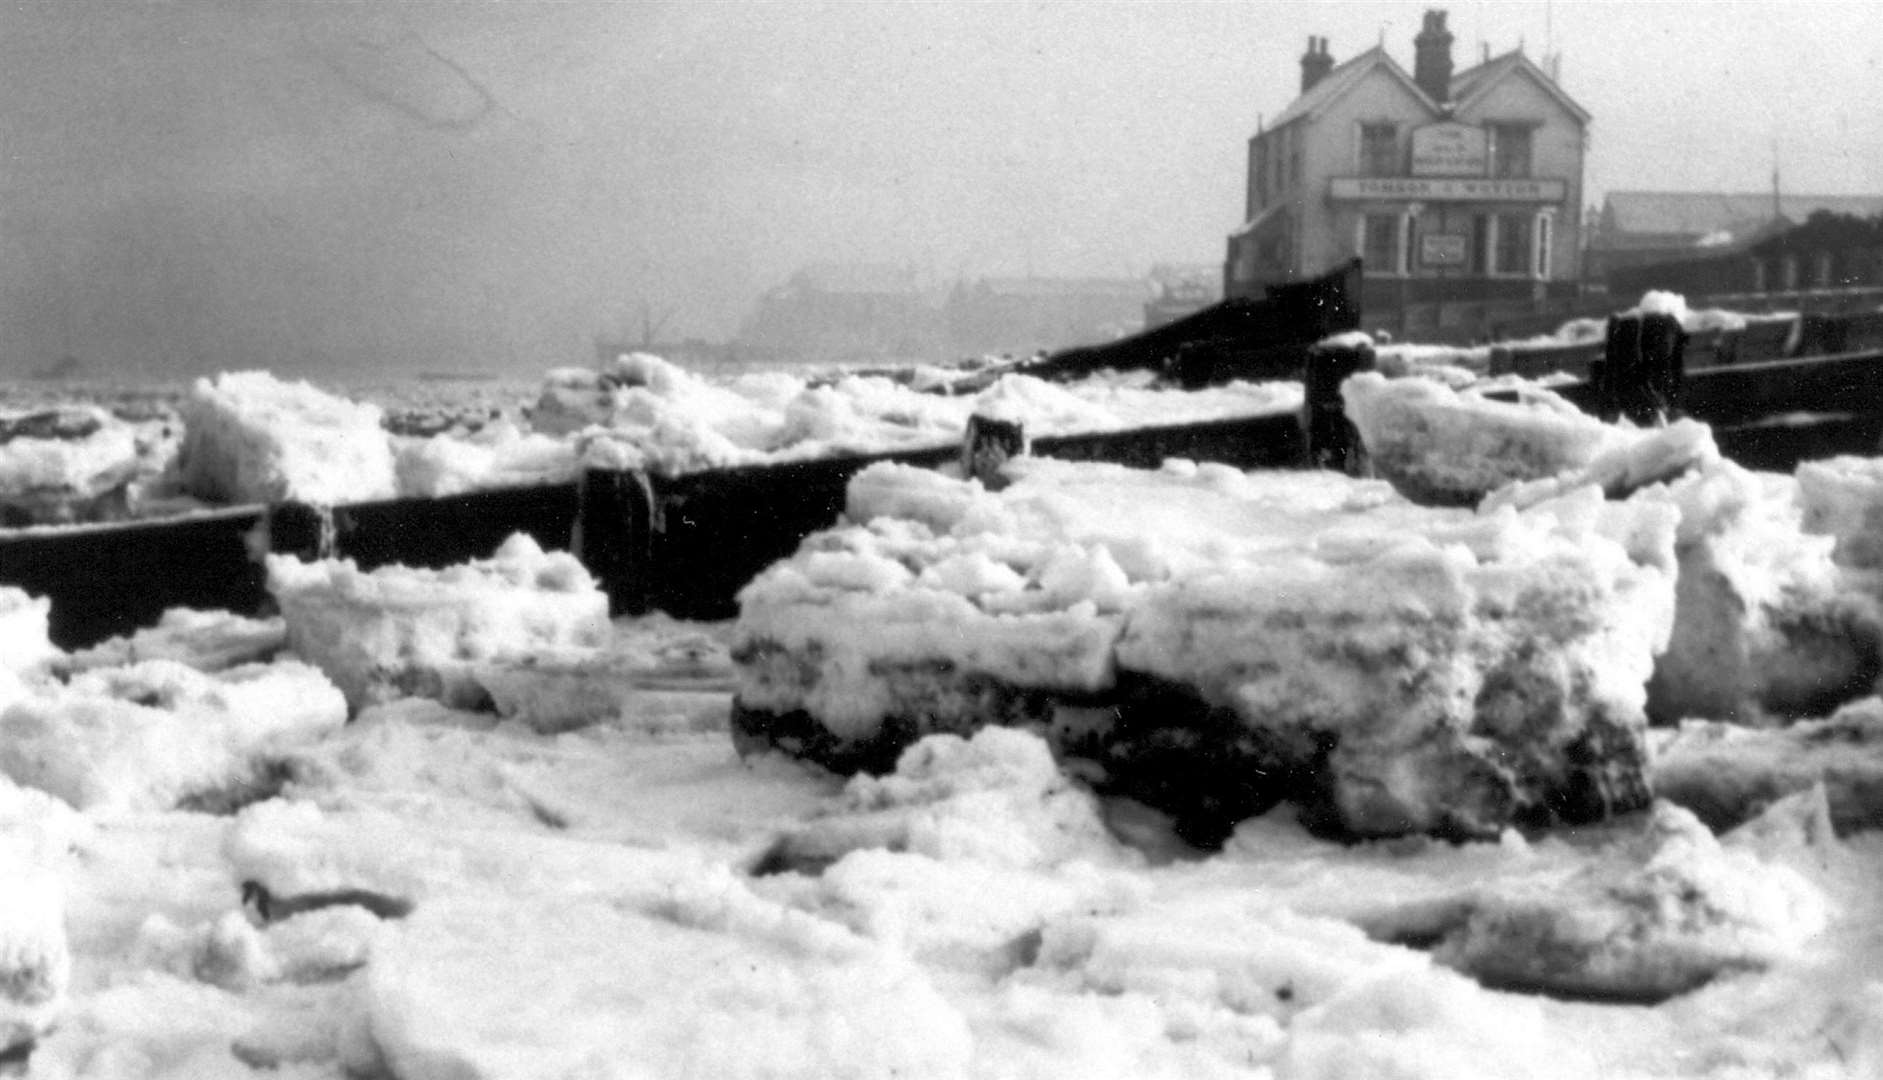 Whitstable after the heavy snow falls across Kent in 1947 - the Neptune pub is in the background